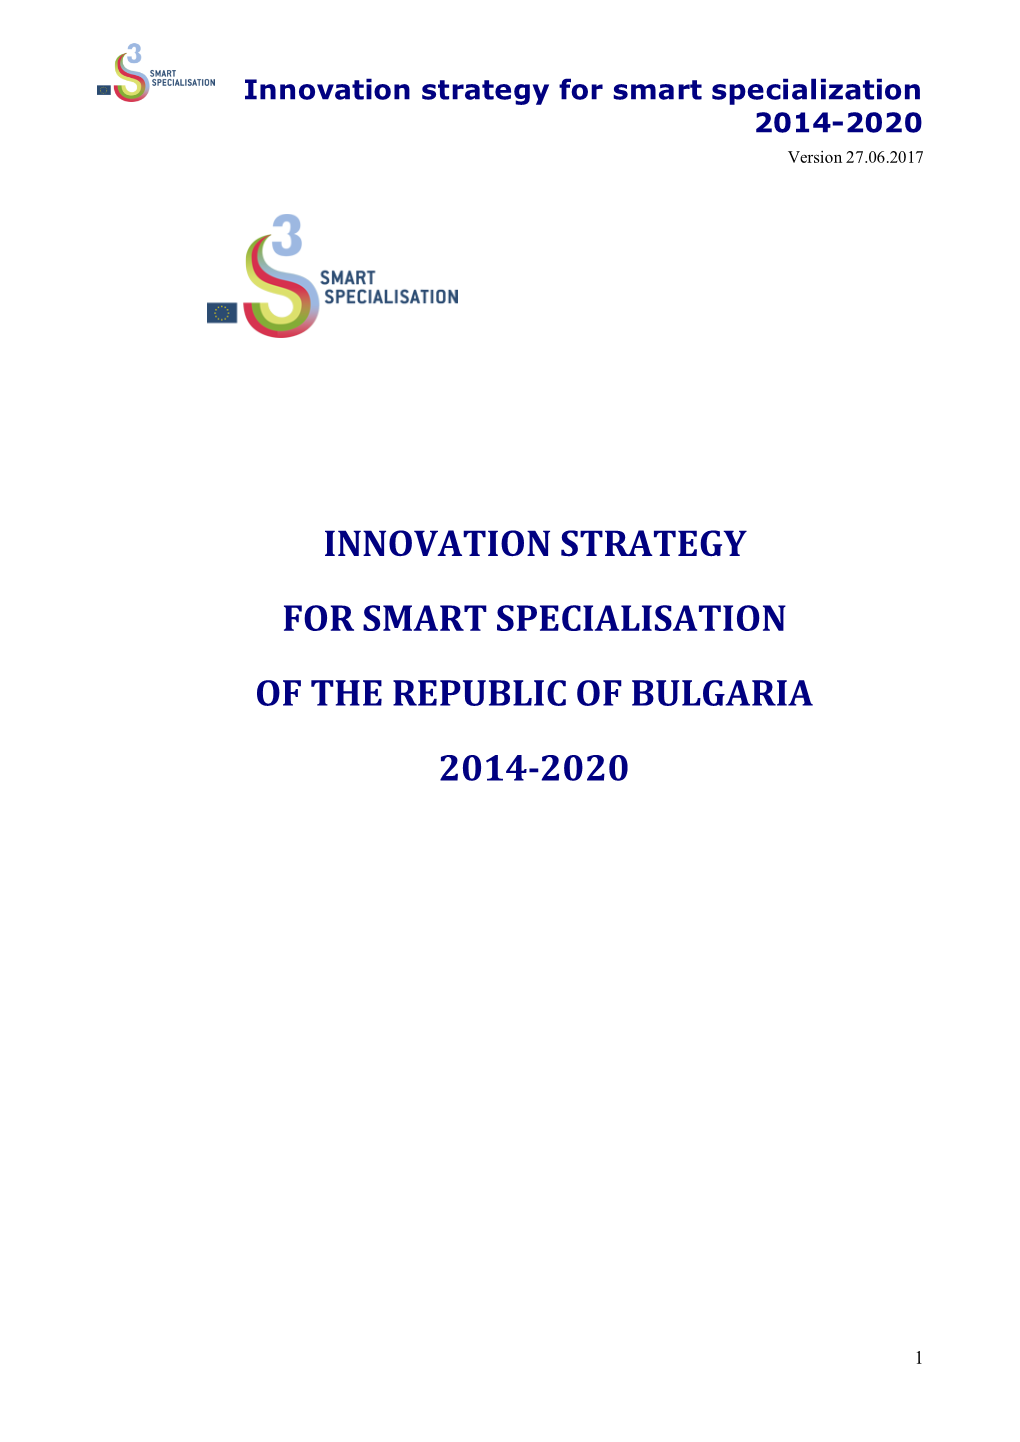 Innovation Strategy for Smart Specialization of the Republic of Bulgaria 2014 - 2020"